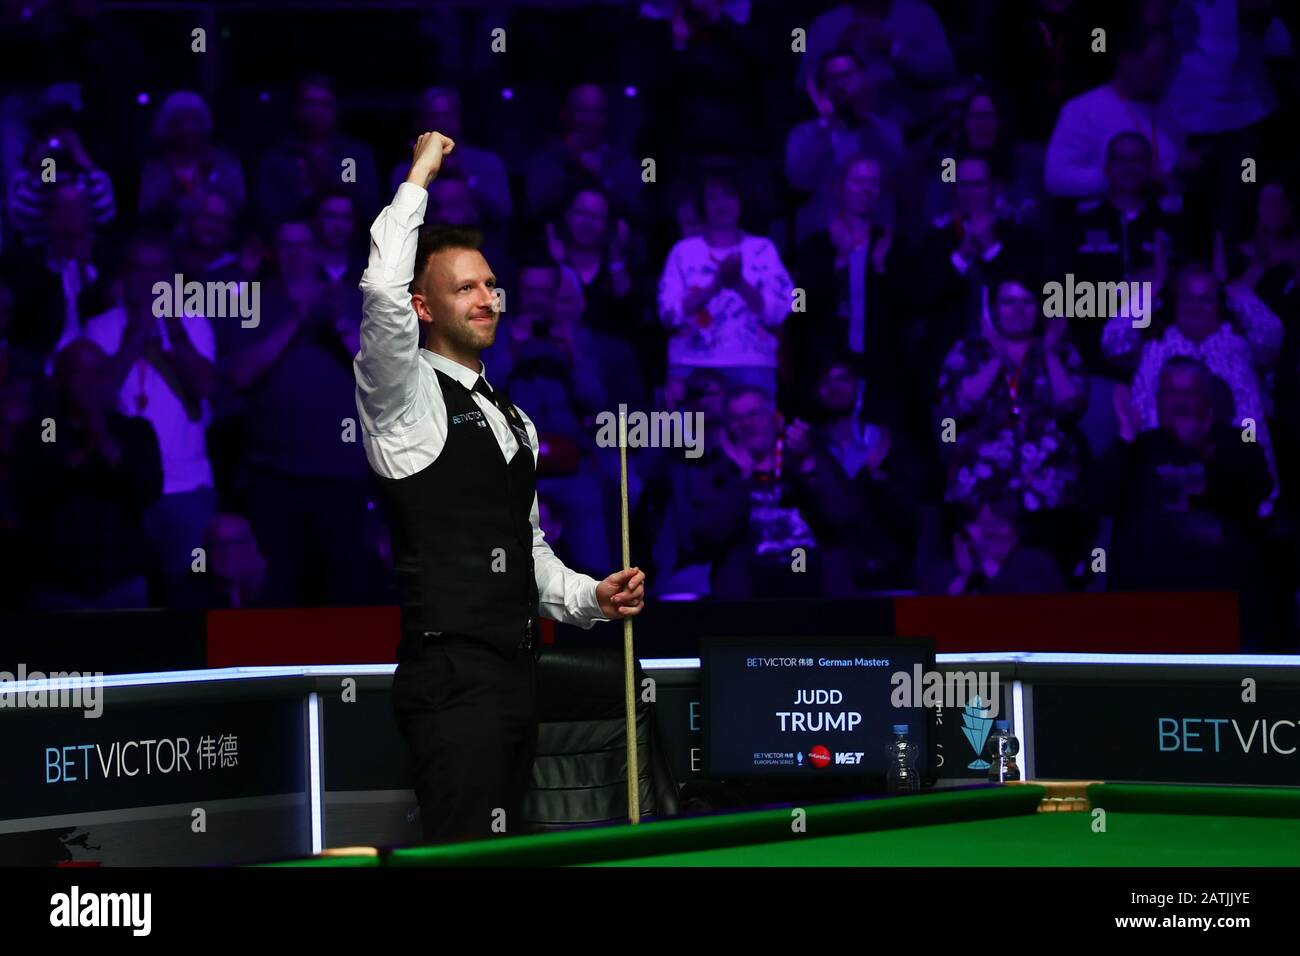 Judd Trump of England celebrates after defeating Neil Robertson of Australia, right, at the final of 2020 German Masters in Berlin, Germany, 2 February 2020